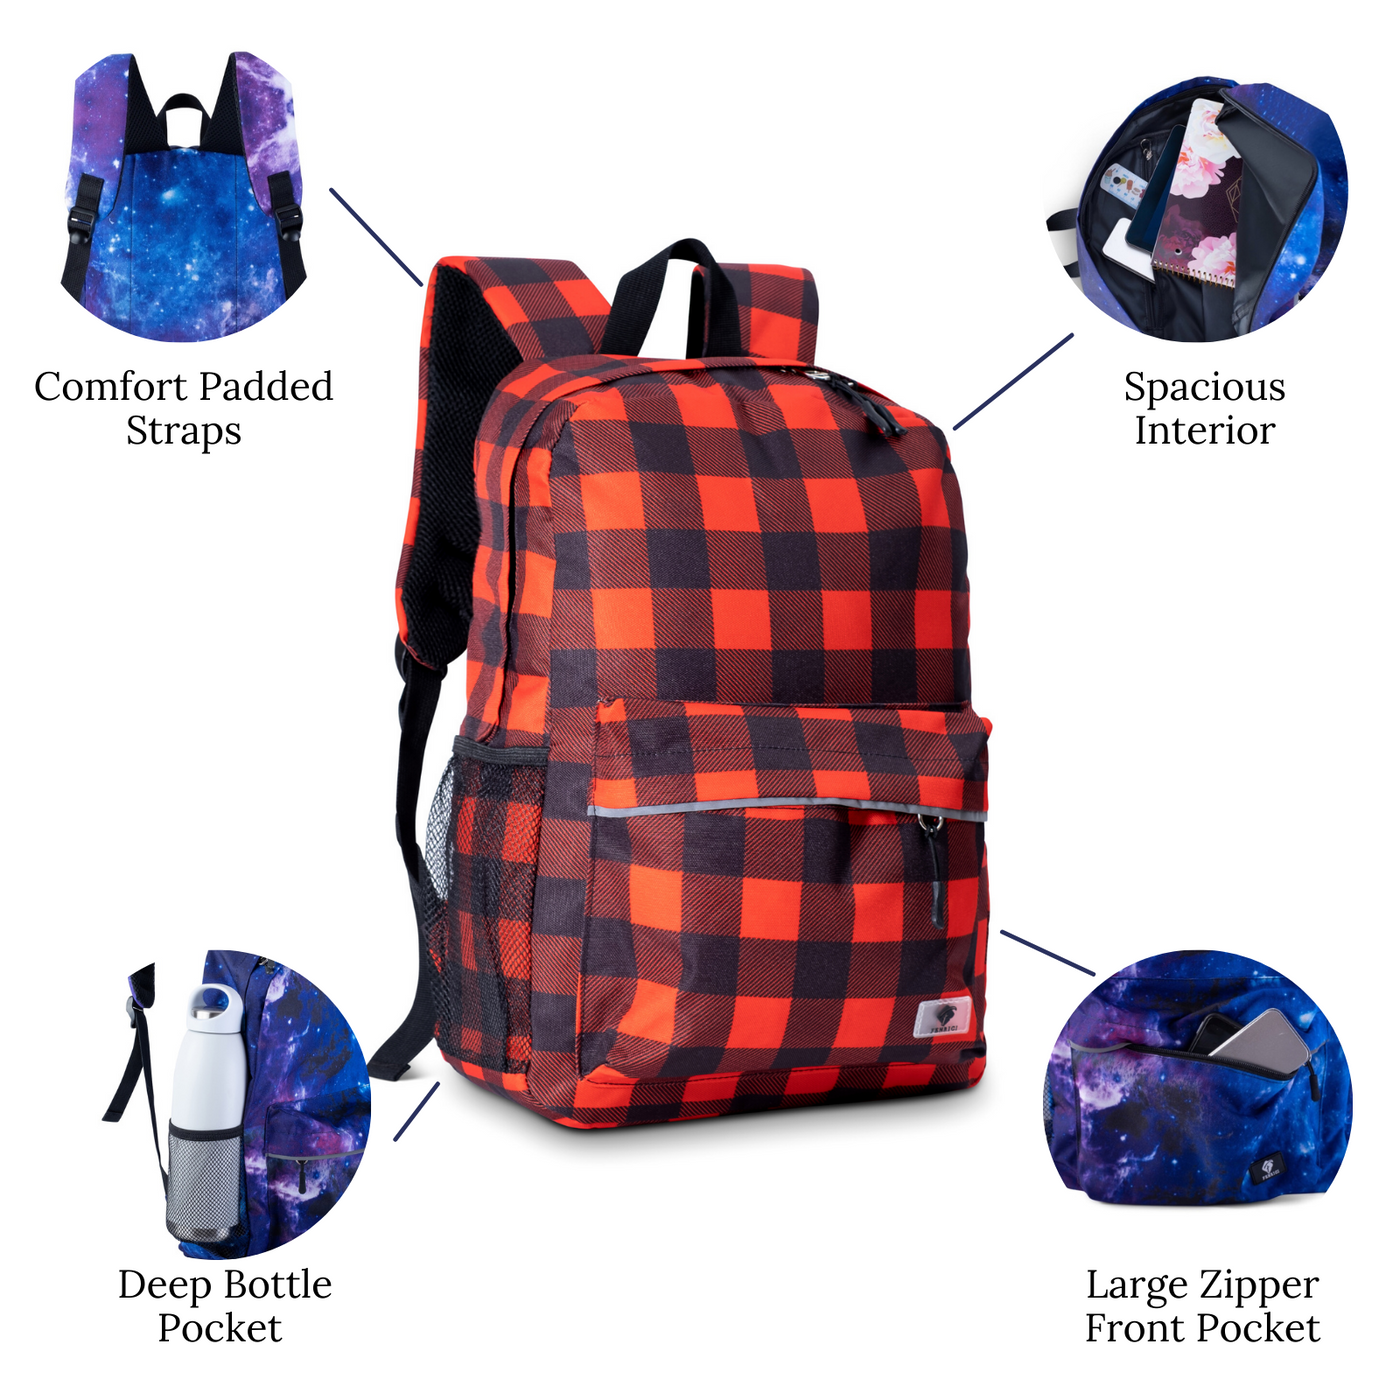 Kids Backpack and Lunch Box Set, Buffalo Check, Red, Gives Back to